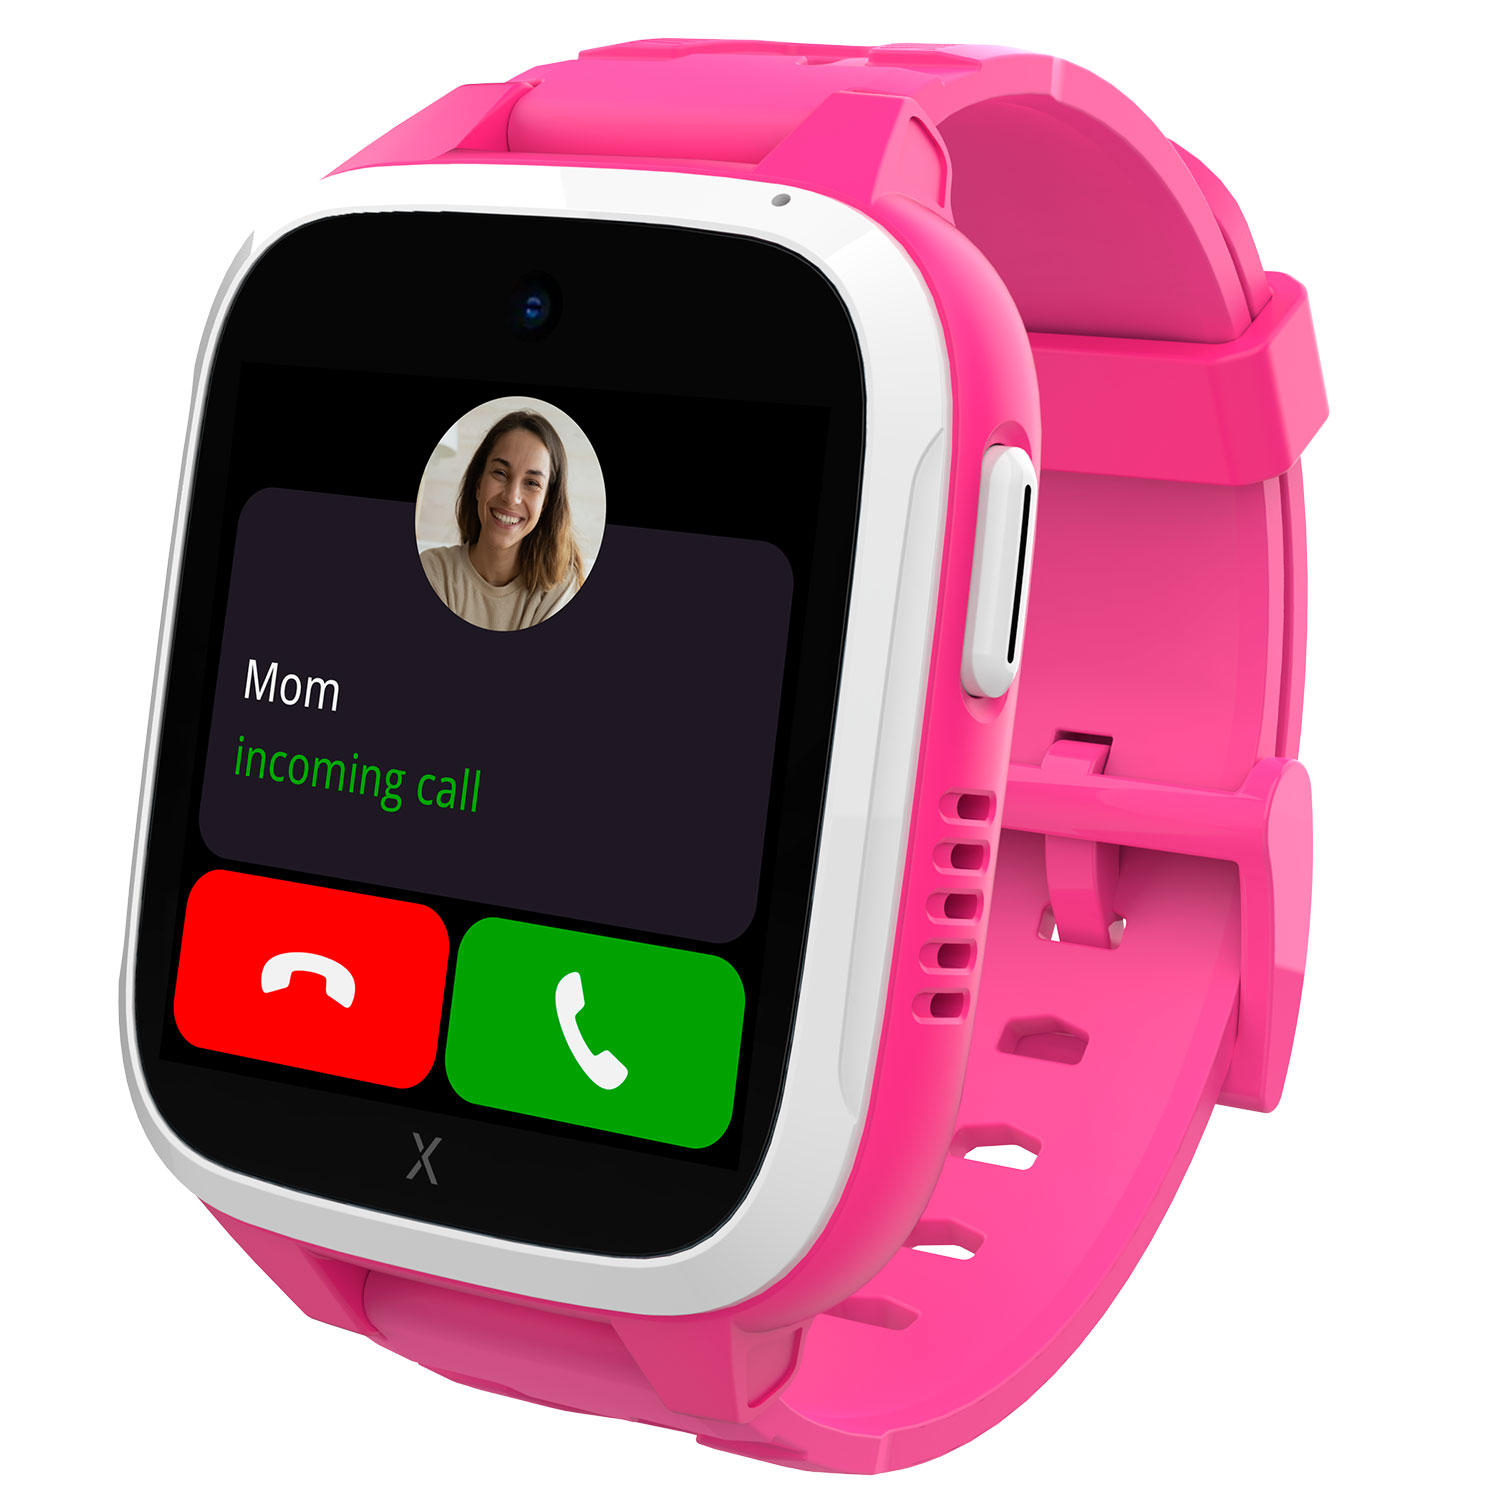 XGO3 Pink Kids Smart Watch Cell Phone with GPS and SIM Card Included - Pink